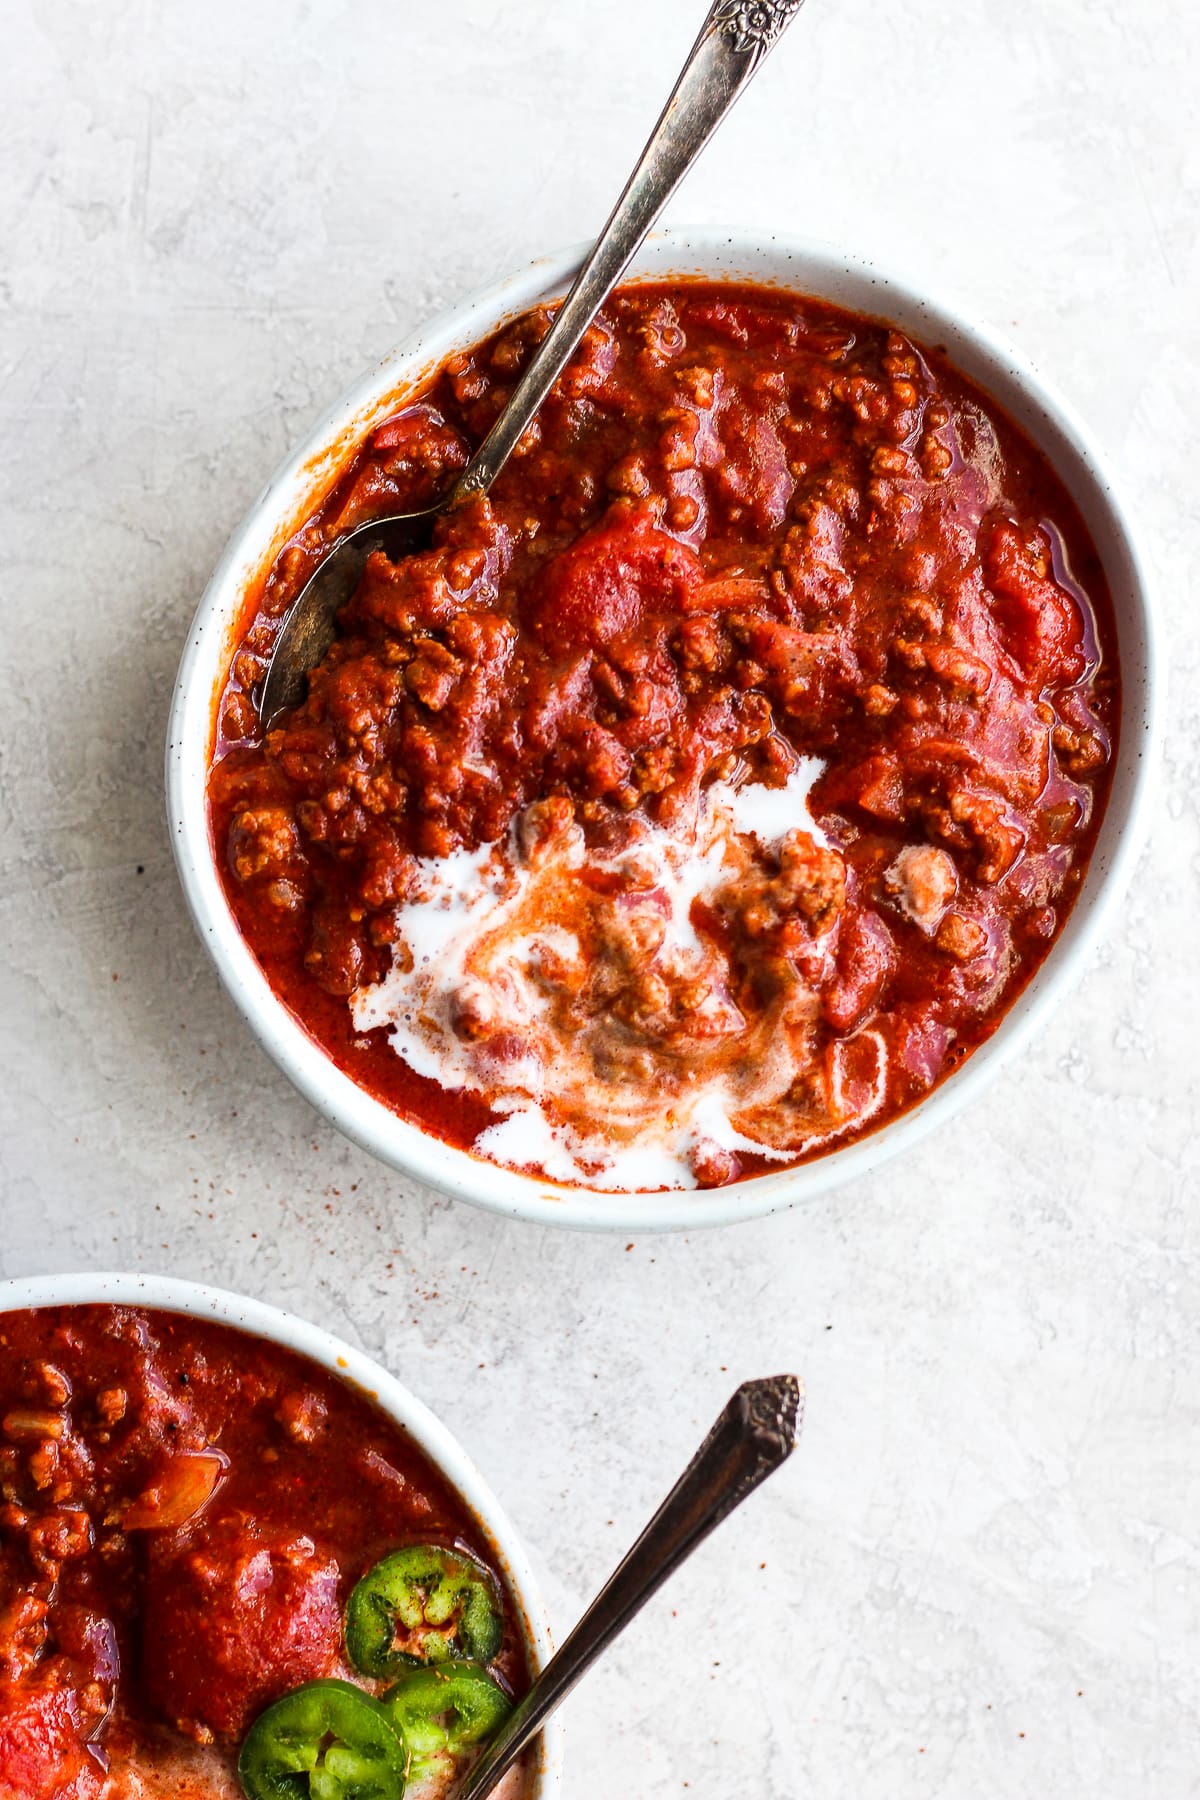 The Absolute Best Classic Slow Cooker Paleo Chili - the simple classic, but made paleo and Whole30! So simple an turns out perfectly EVERY time! #whole30 #paleo #glutenfree #dairyfree